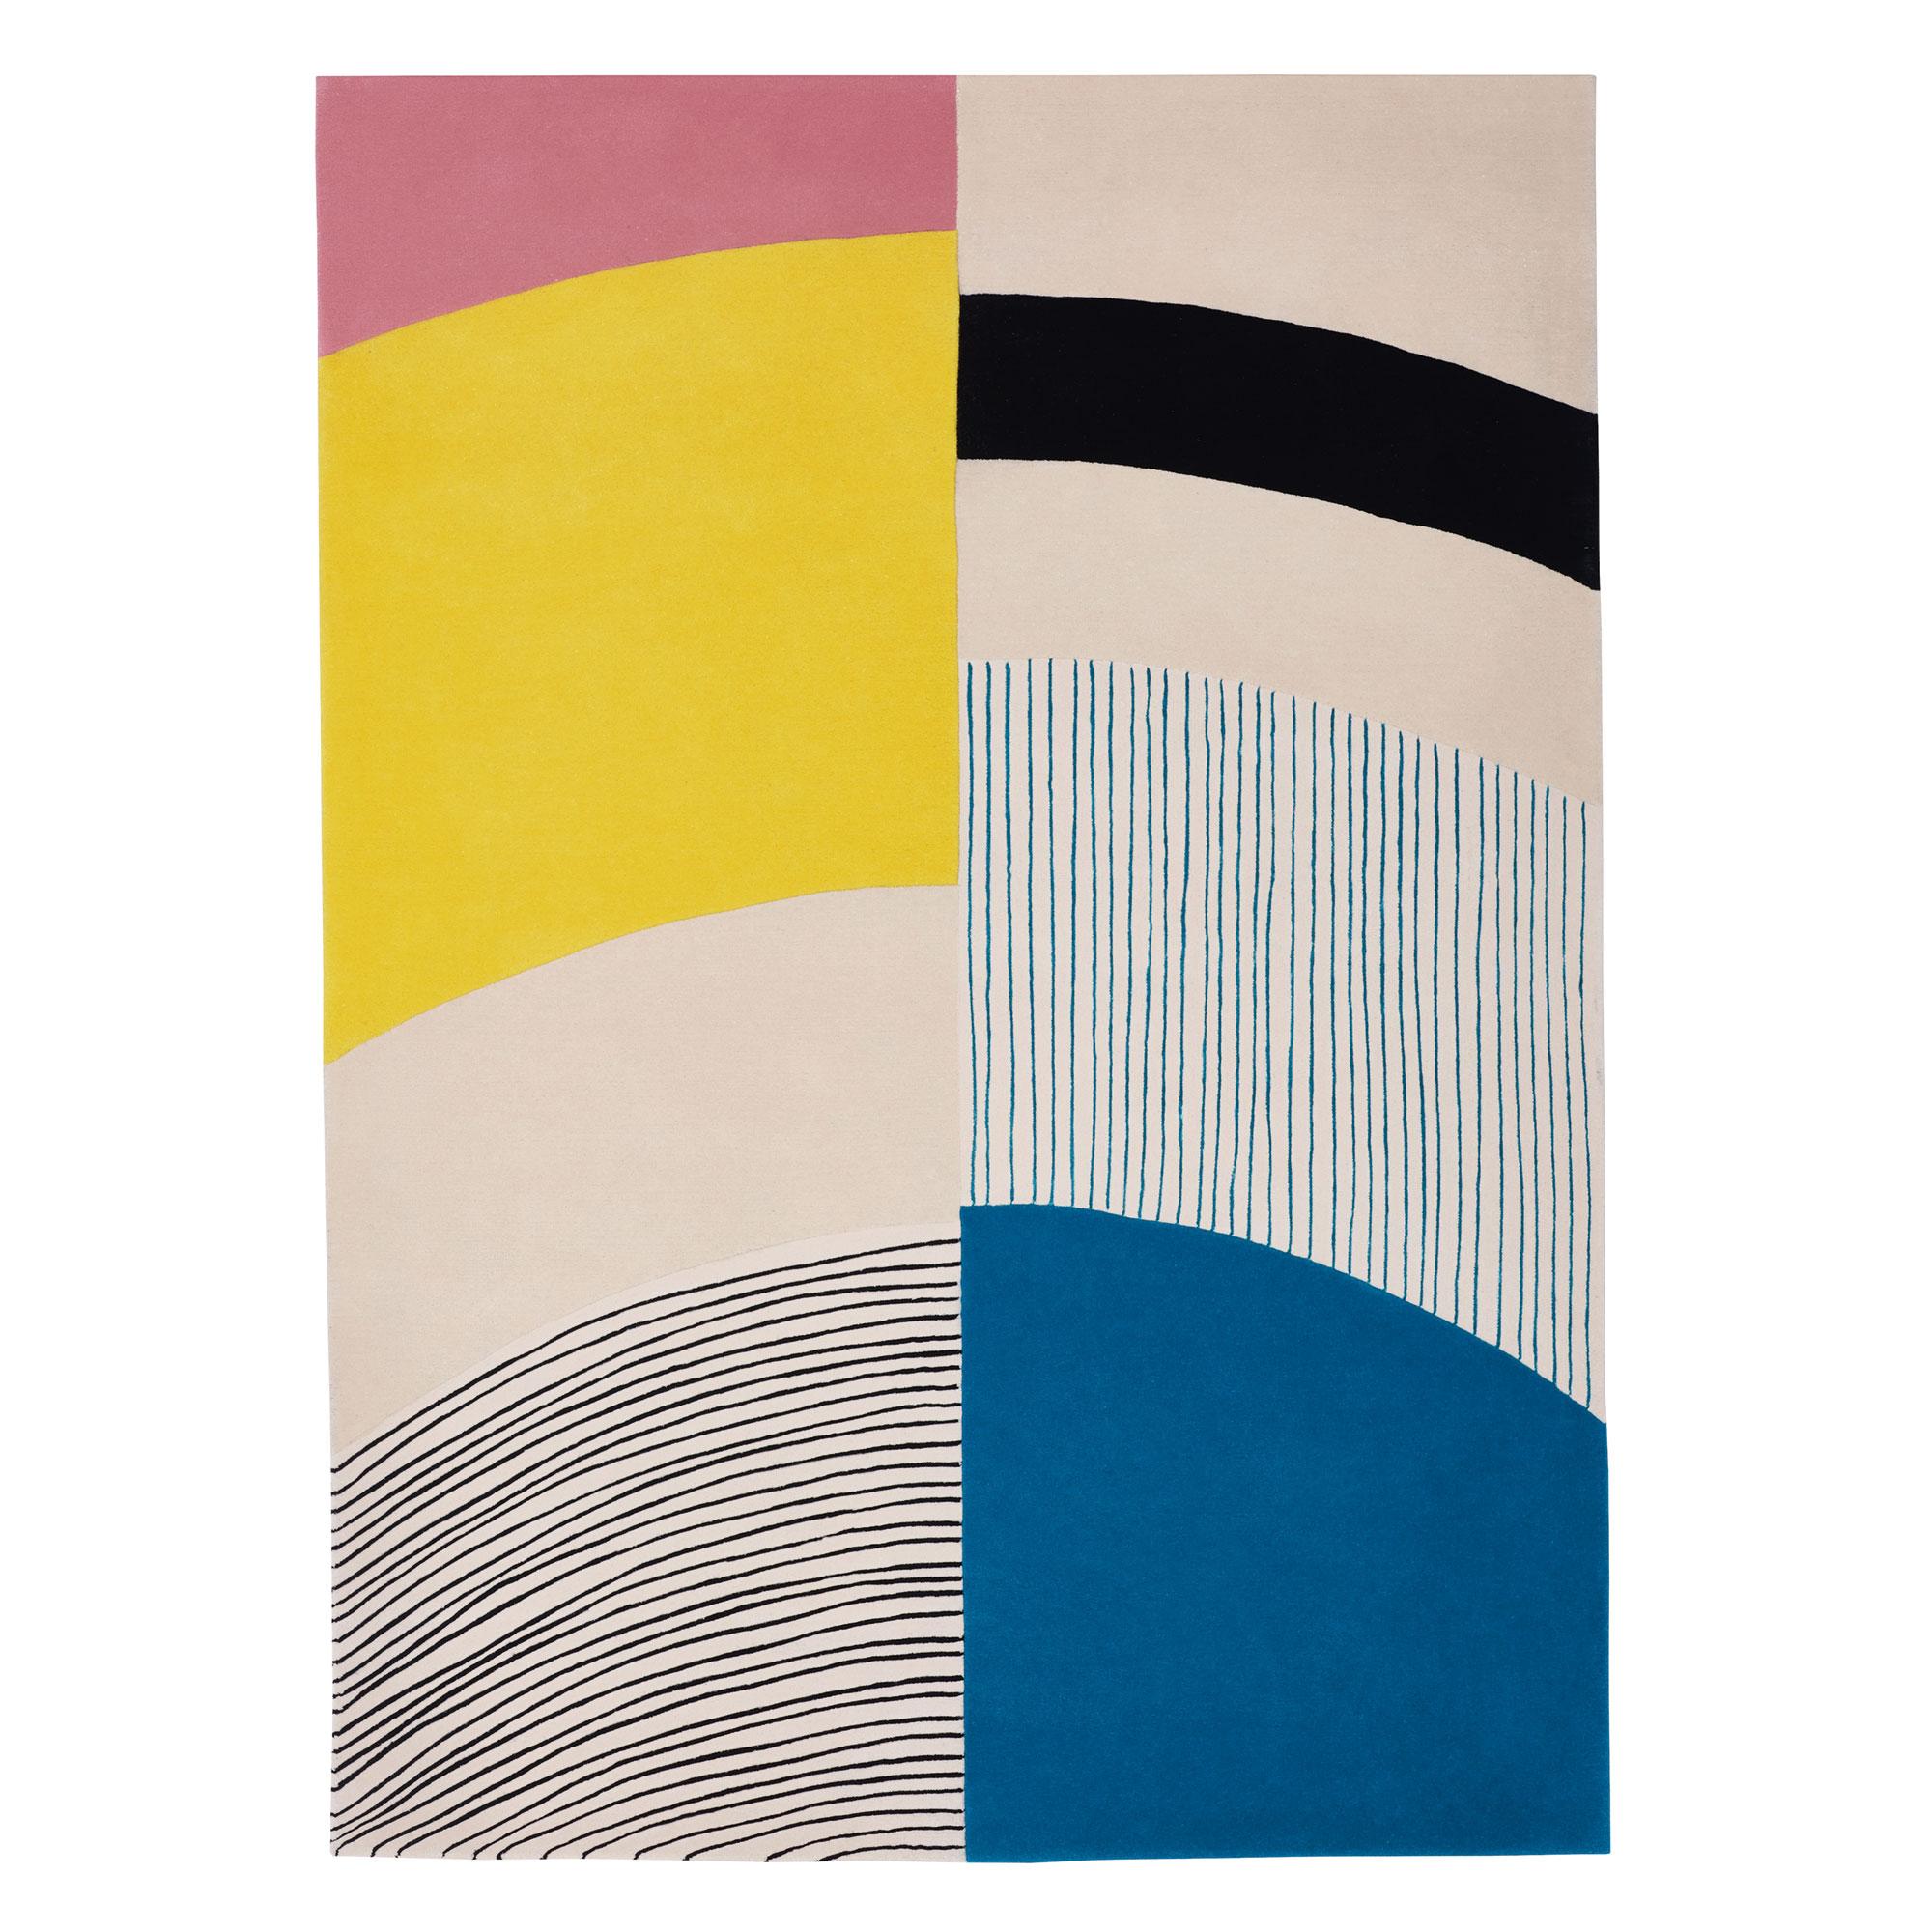 Seoul by Day N°1 rug by Thomas Dariel 
Dimensions: D 170 x W 240 cm 
Materials: New Zealand wool and viscose. 
Also available in other colors, designs, and dimensions.


The South Korean capital is known for its twenty-five bridges spanning